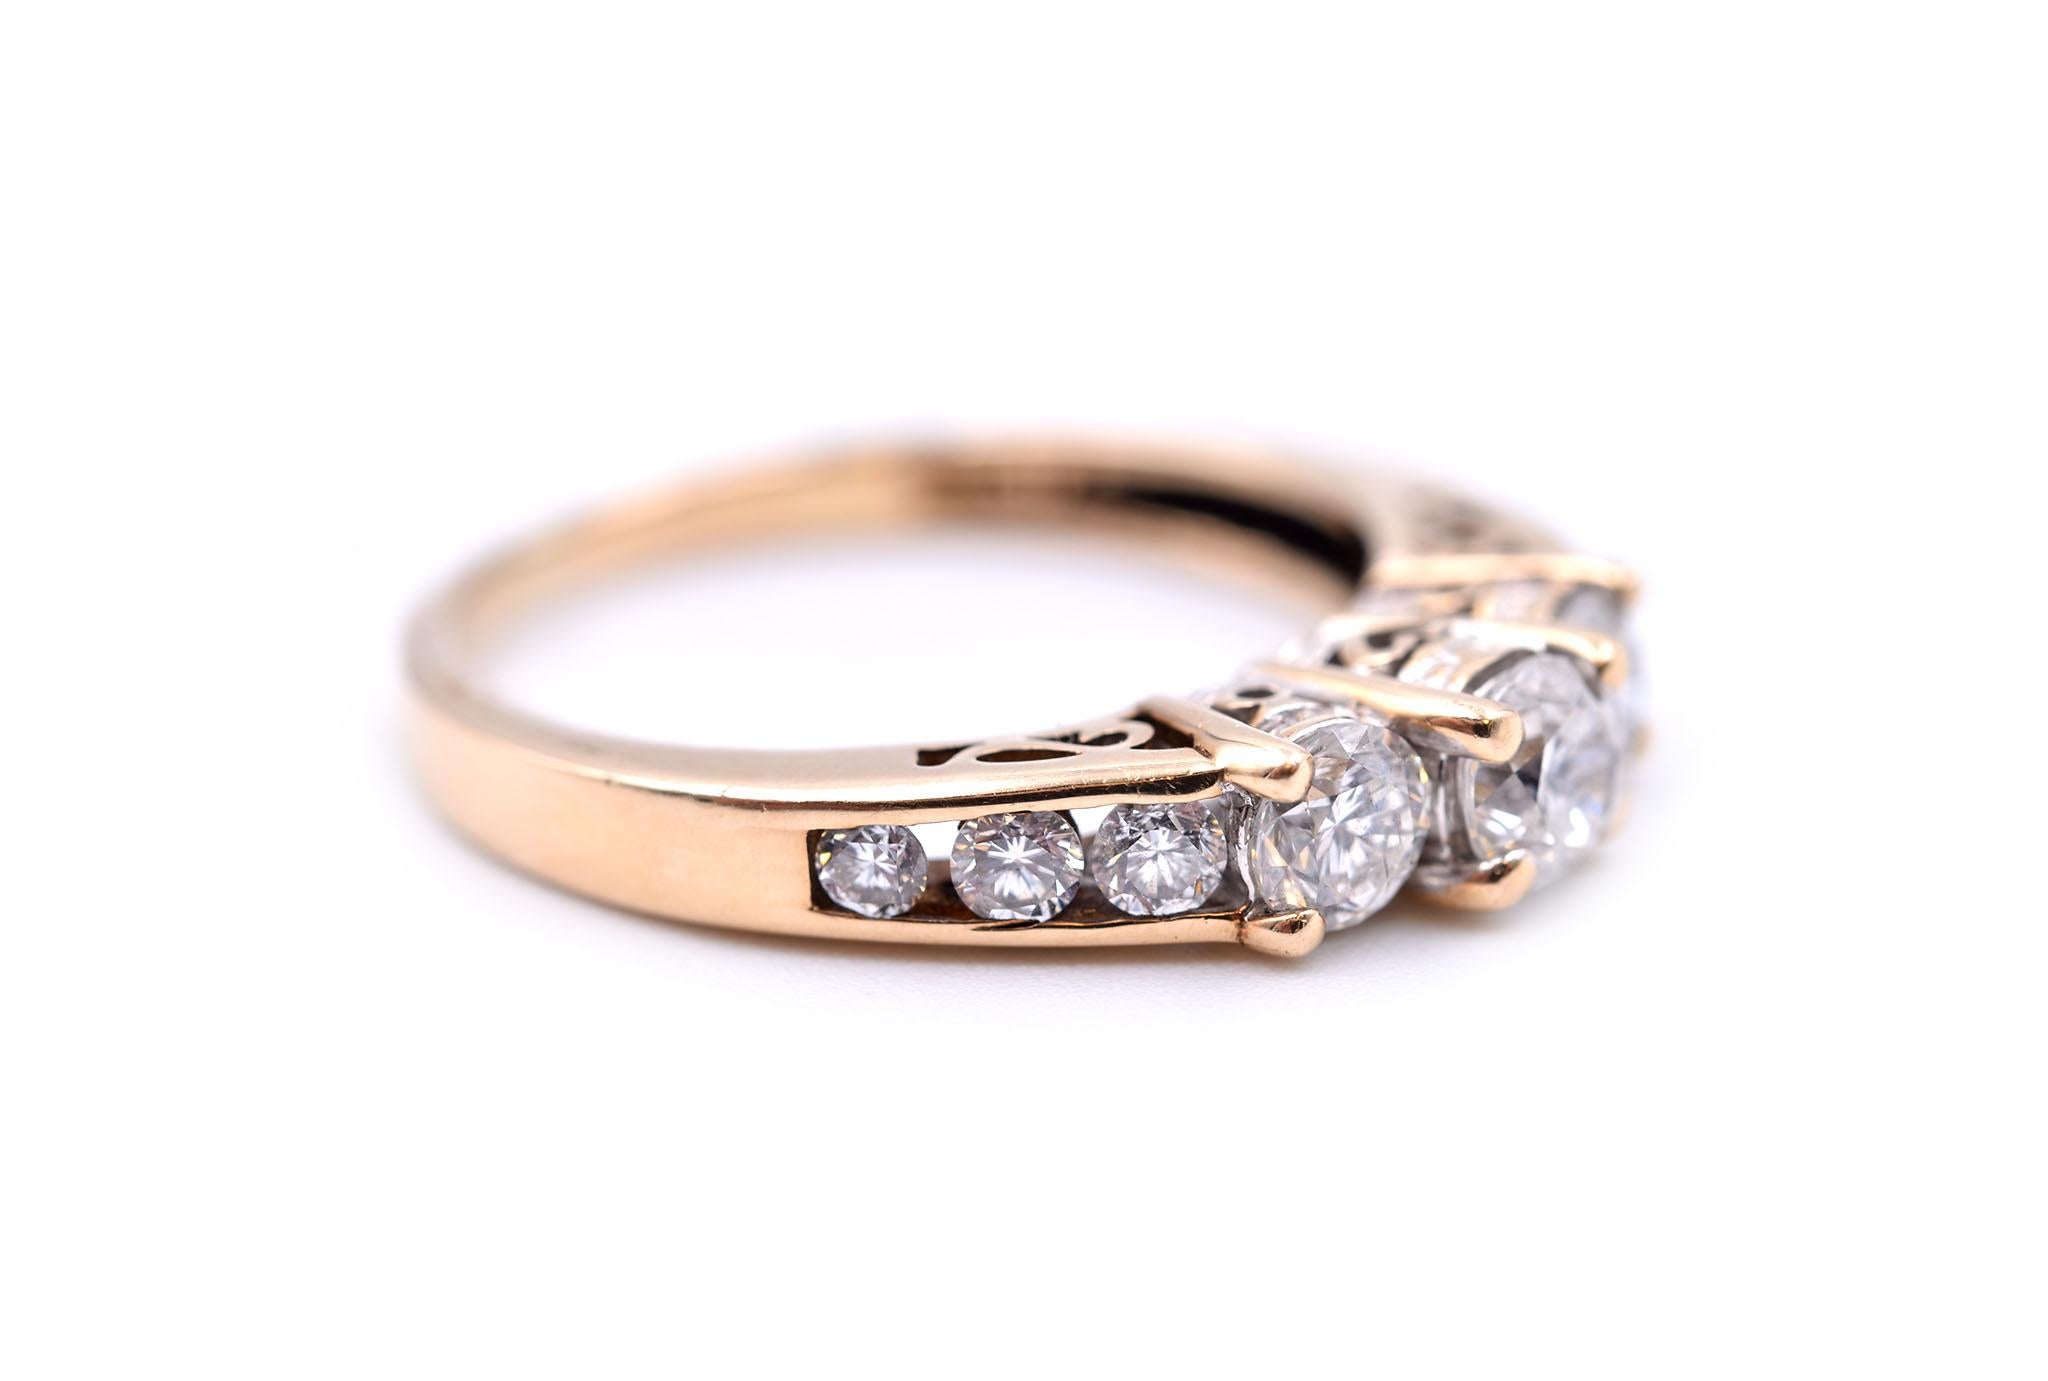 Designer: custom design
Material: 14k yellow gold
Diamonds: nine round brilliant cut = 1.00 carat total weight.
Color: H
Clarity: SI1
Ring size: 7 (please allow two additional shipping days for sizing requests)
Weight: 3.39 grams 
